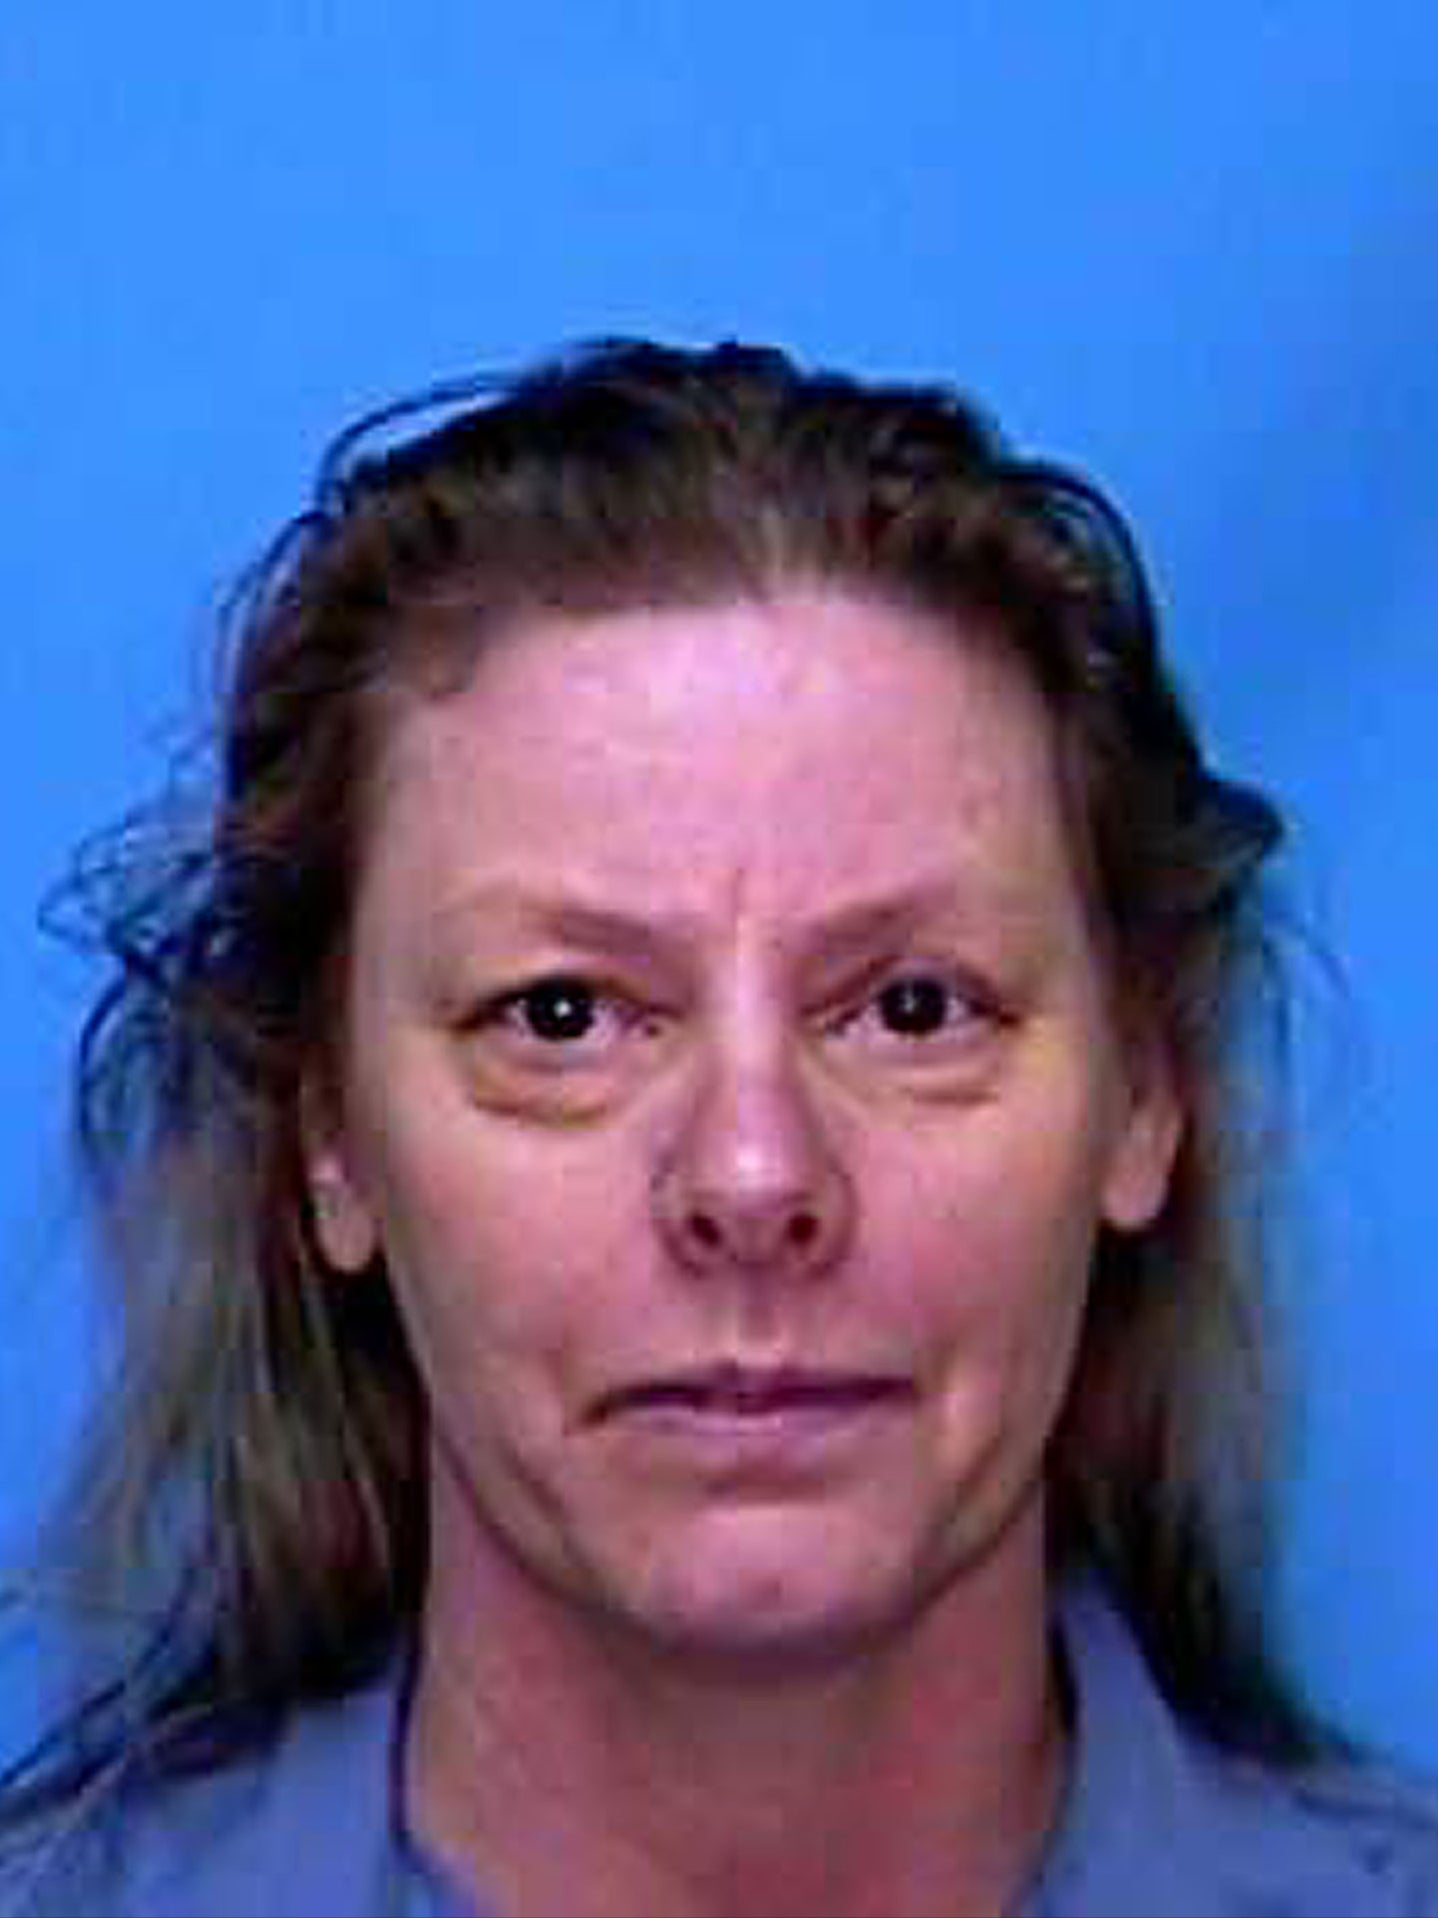 Aileen Wuornos is shown in this undated photograph from the Florida Department of Corrections